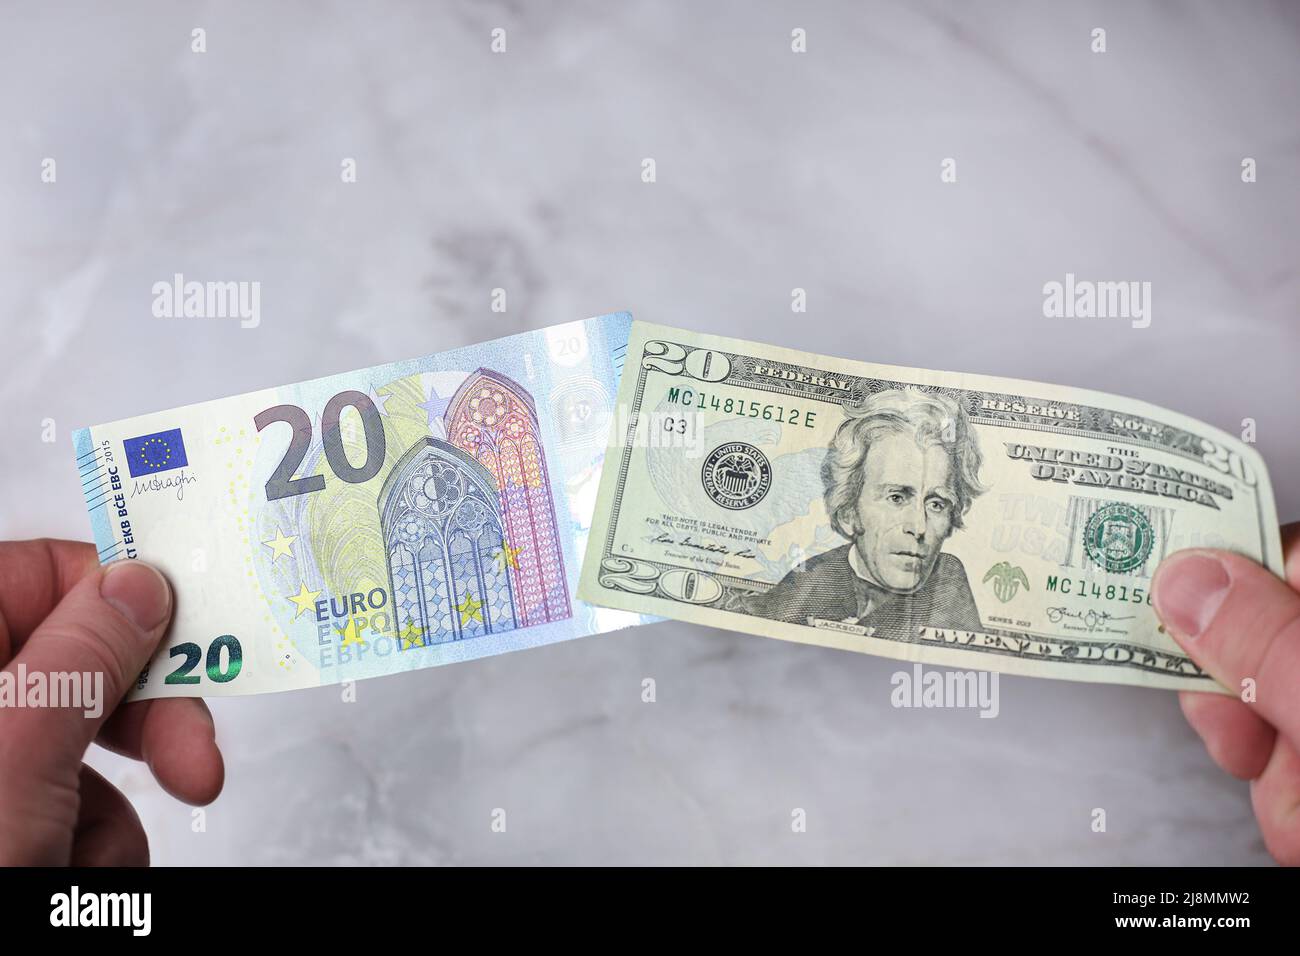 Banknotes of 20 euros and 20 US dollars in hands for comparison Stock Photo